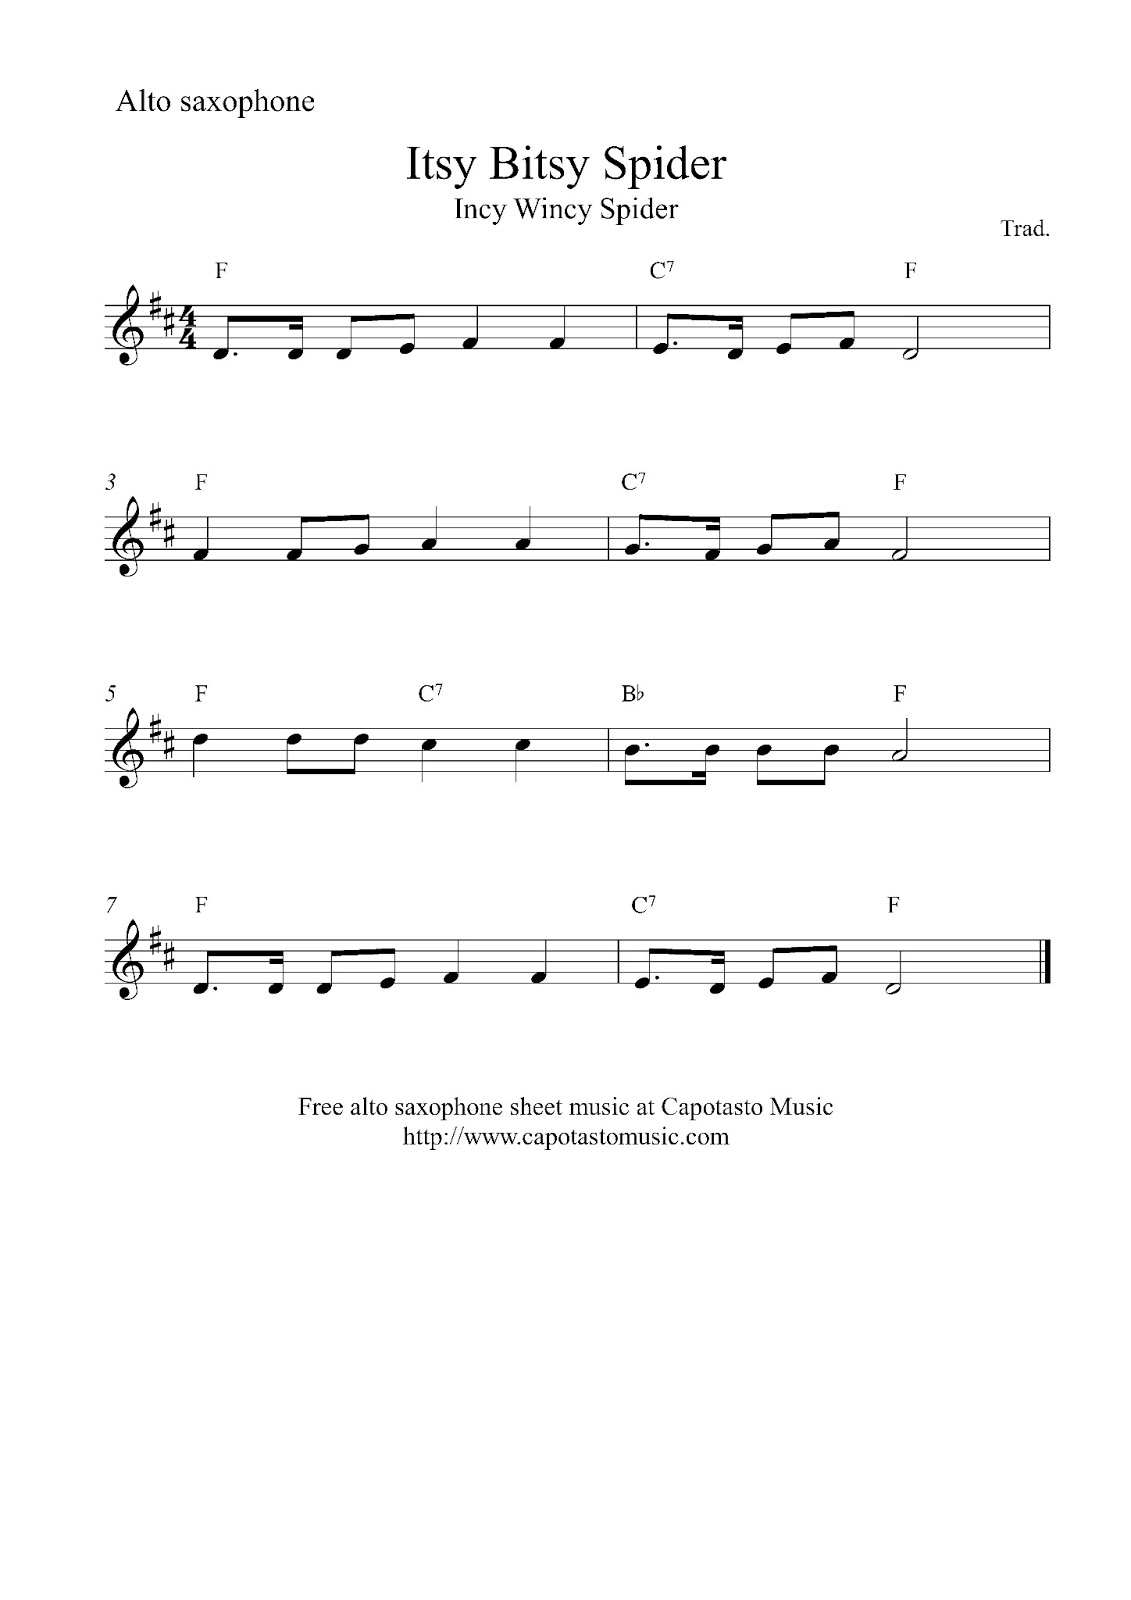 Free Easy Alto Saxophone Sheet Music, Itsy Bitsy Spider (Incy Wincy Spider) - Itsy Bitsy Spider, Transparent background PNG HD thumbnail